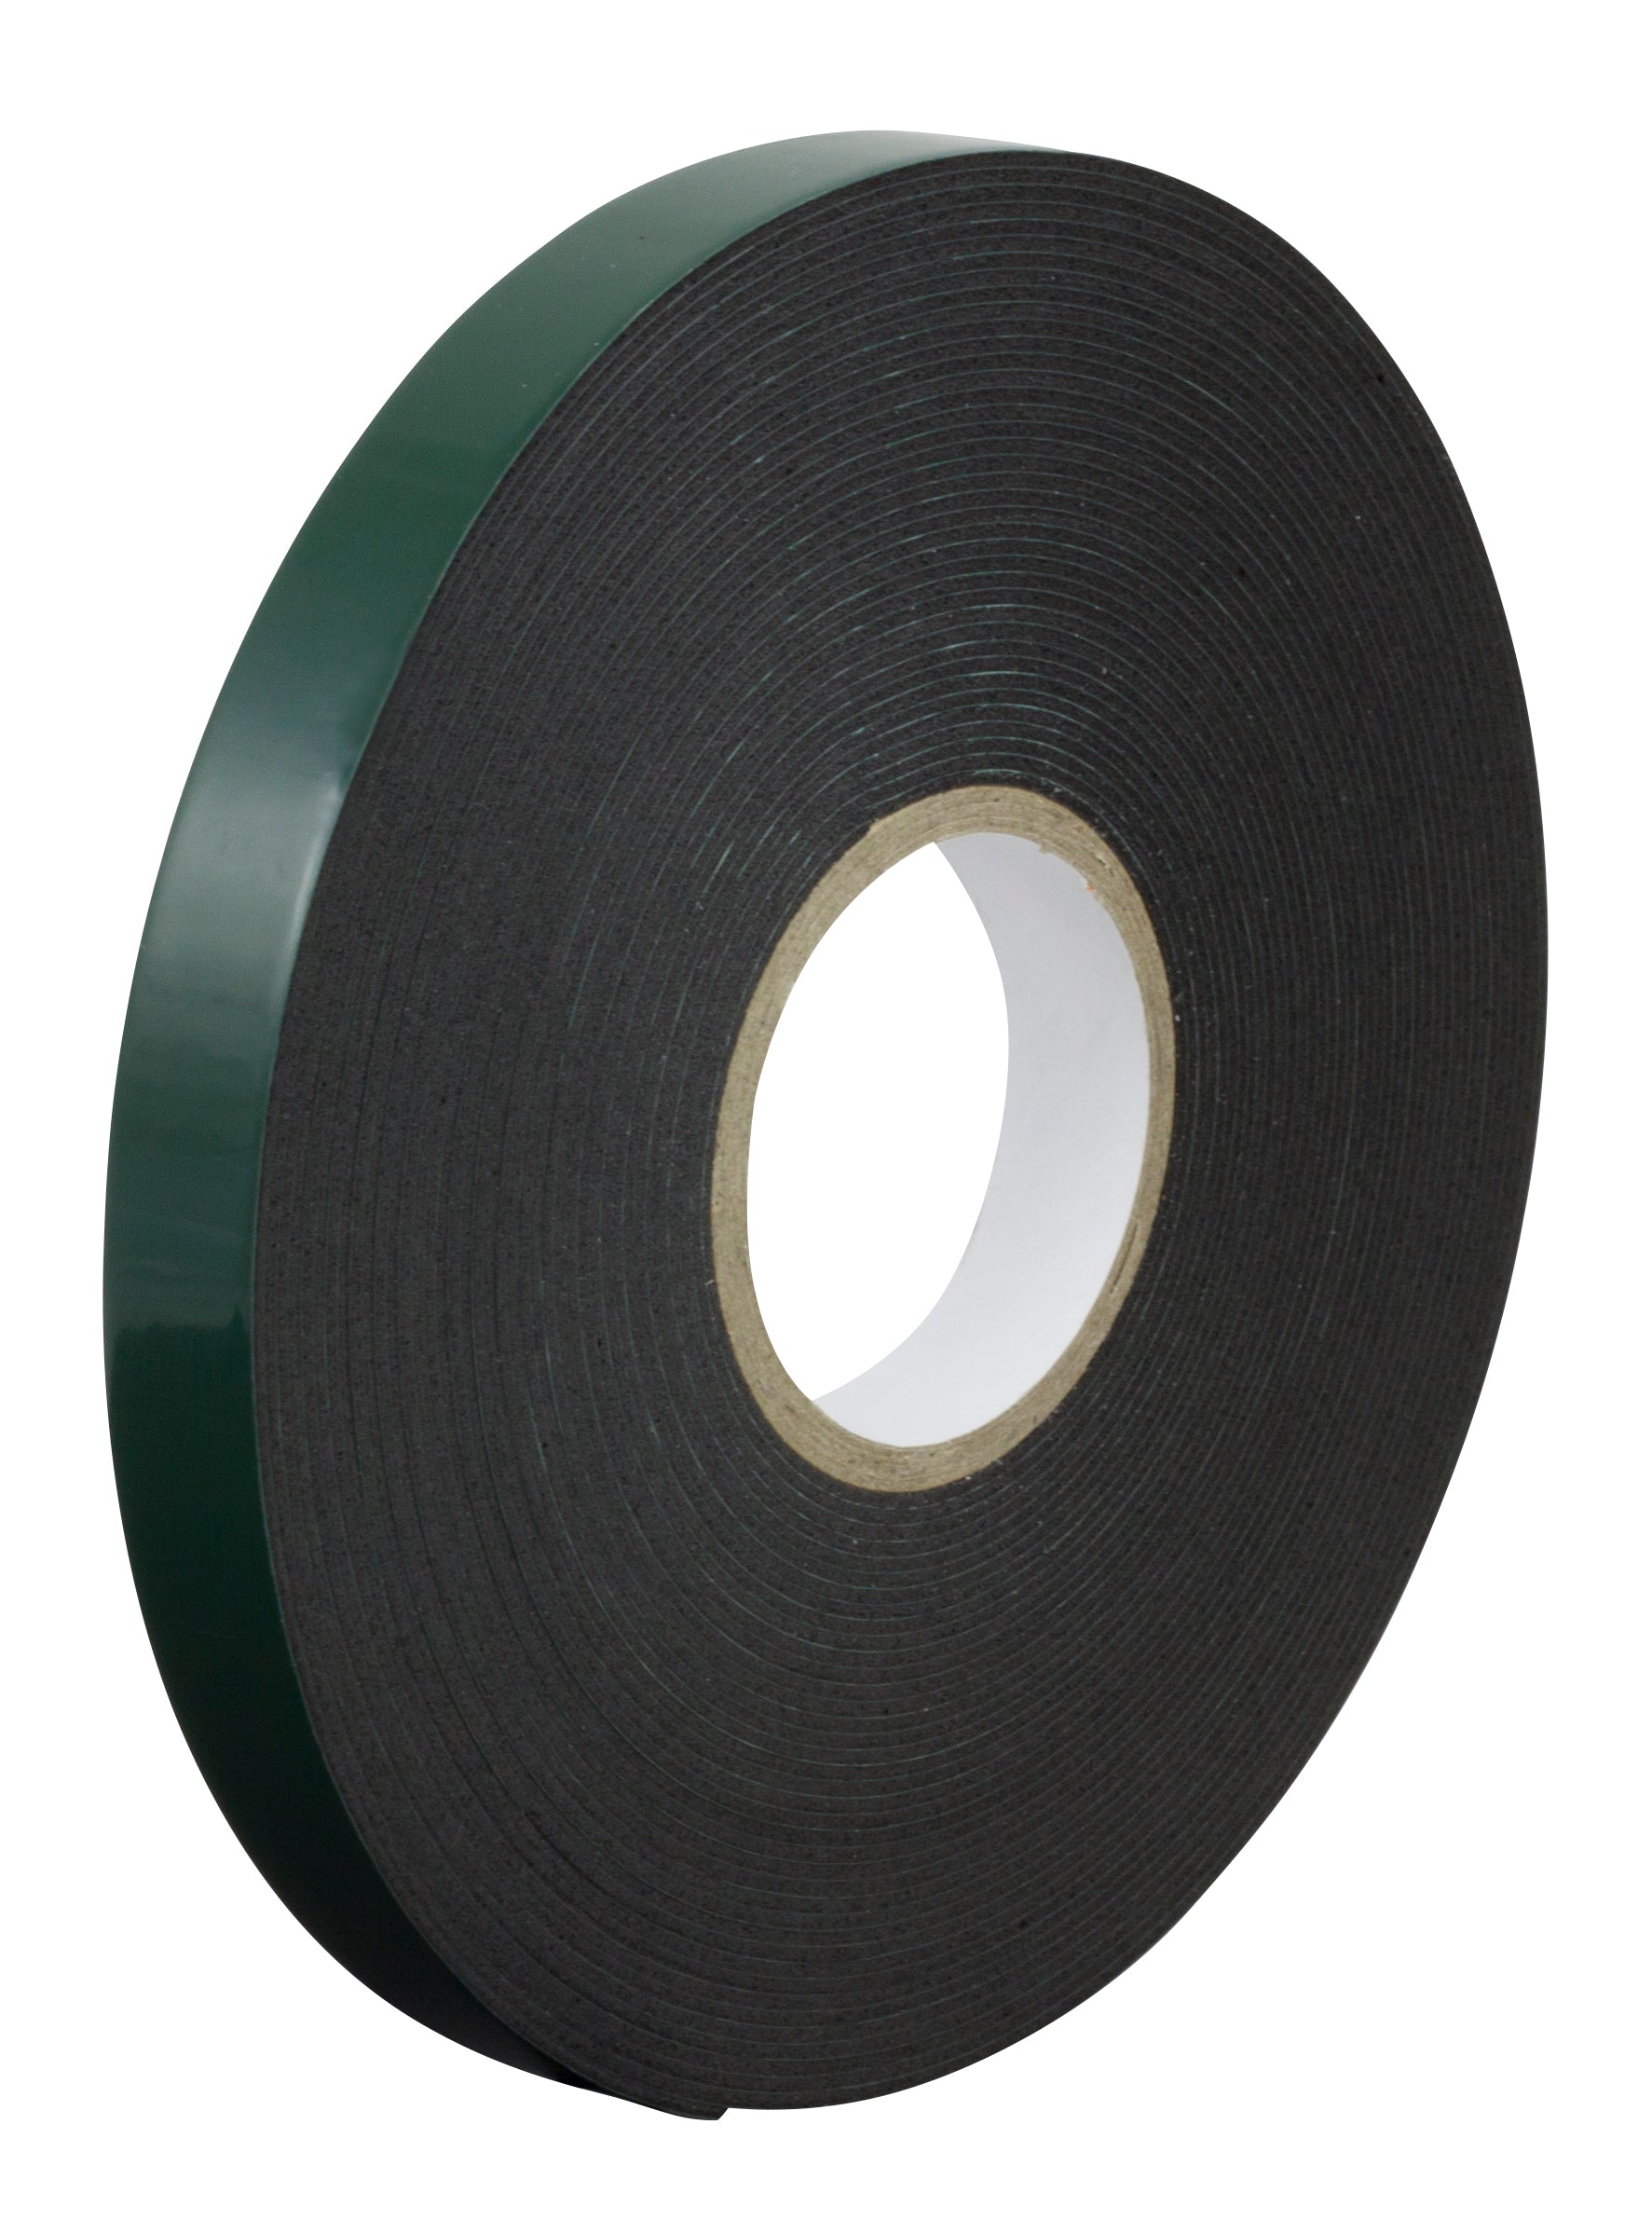 Double Sided Foam Tape 25mm x 10m x 1mm Thickness - Per Pack